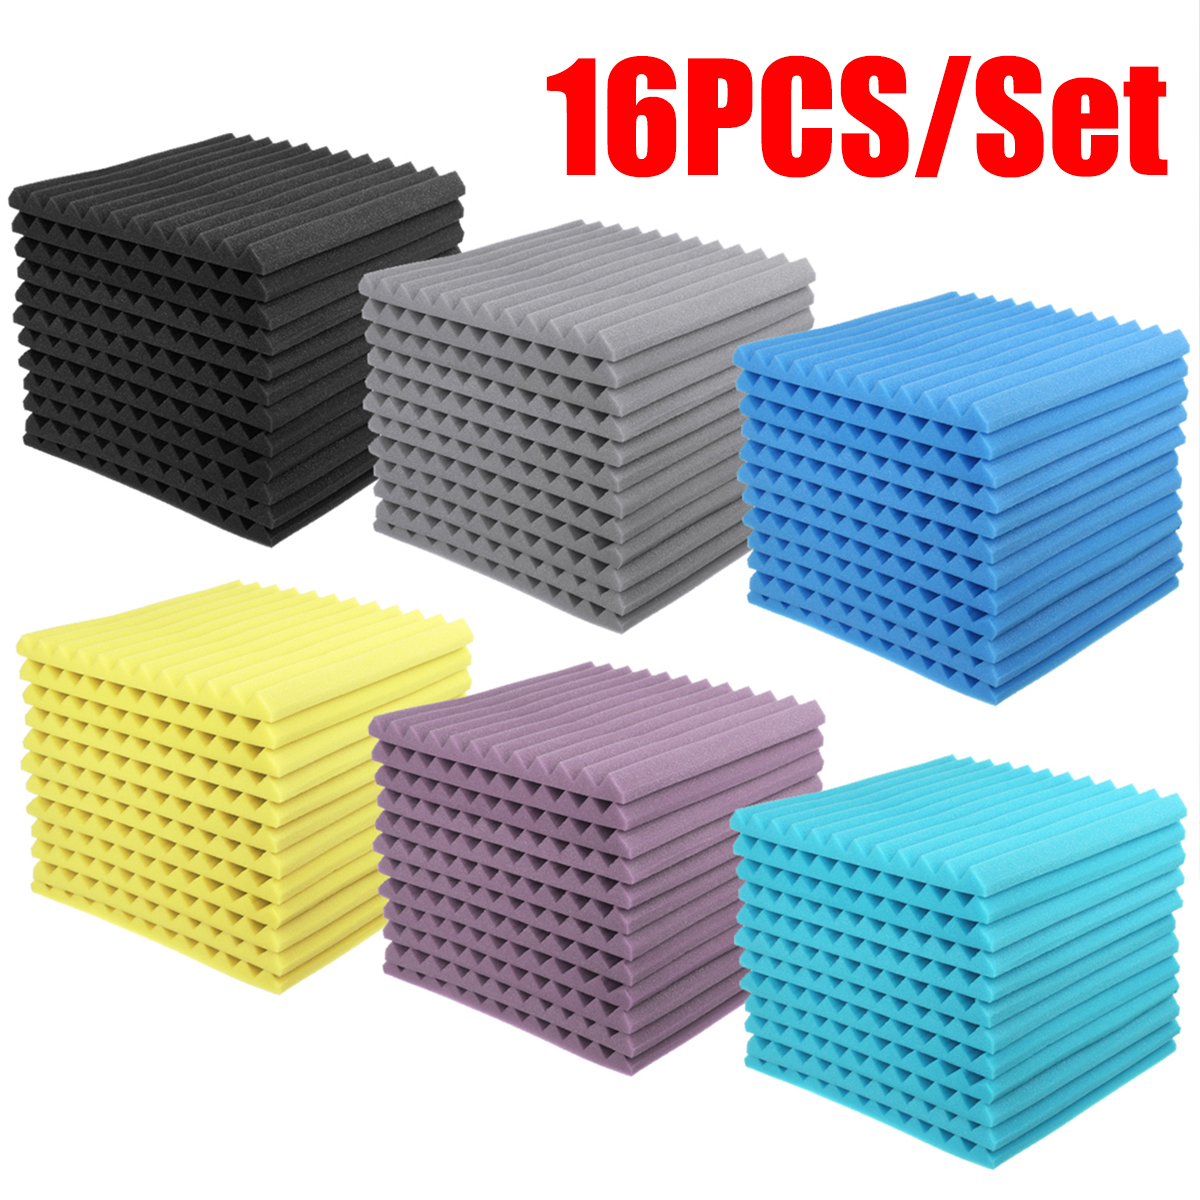 16-Pcs-Soundproofing-Wedges-Acoustic-Panels-Tiles-Insulation-Closed-Cell-Foams-1737781-2